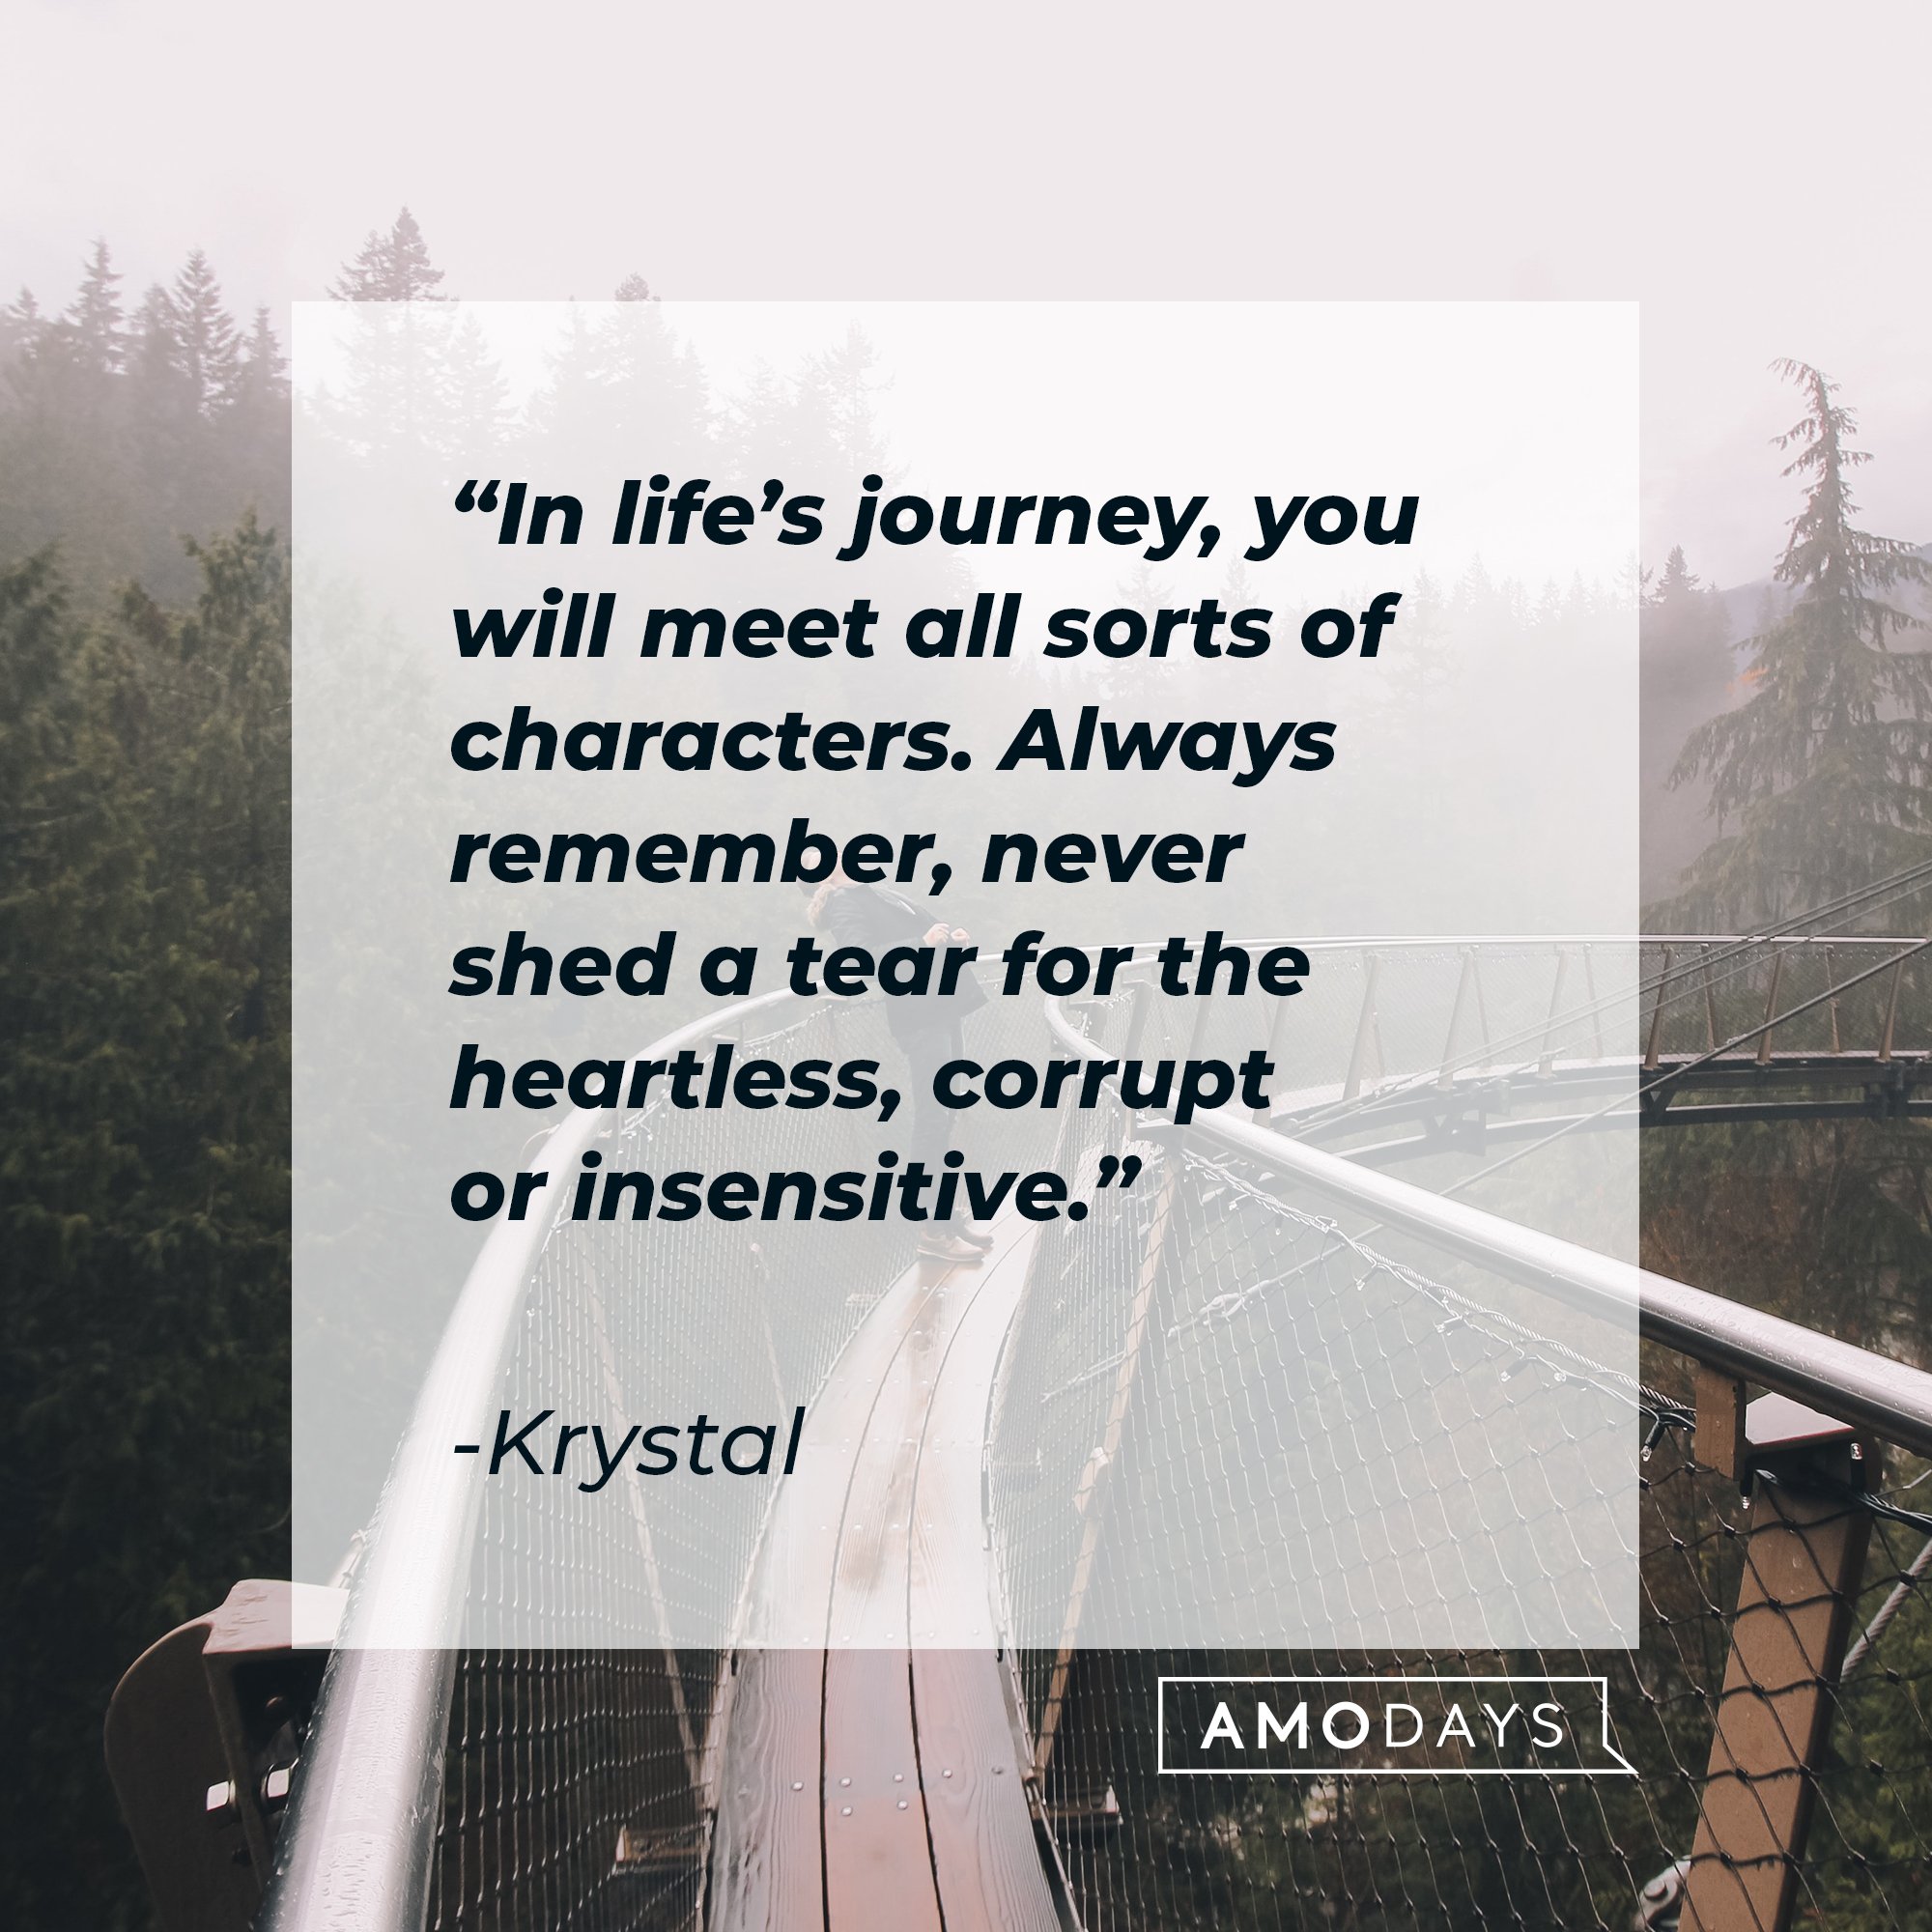 Krystal's quote: "In life’s journey, you will meet all sorts of characters. Always remember, never shed a tear for the heartless, corrupt, or insensitive." | Image: AmoDays